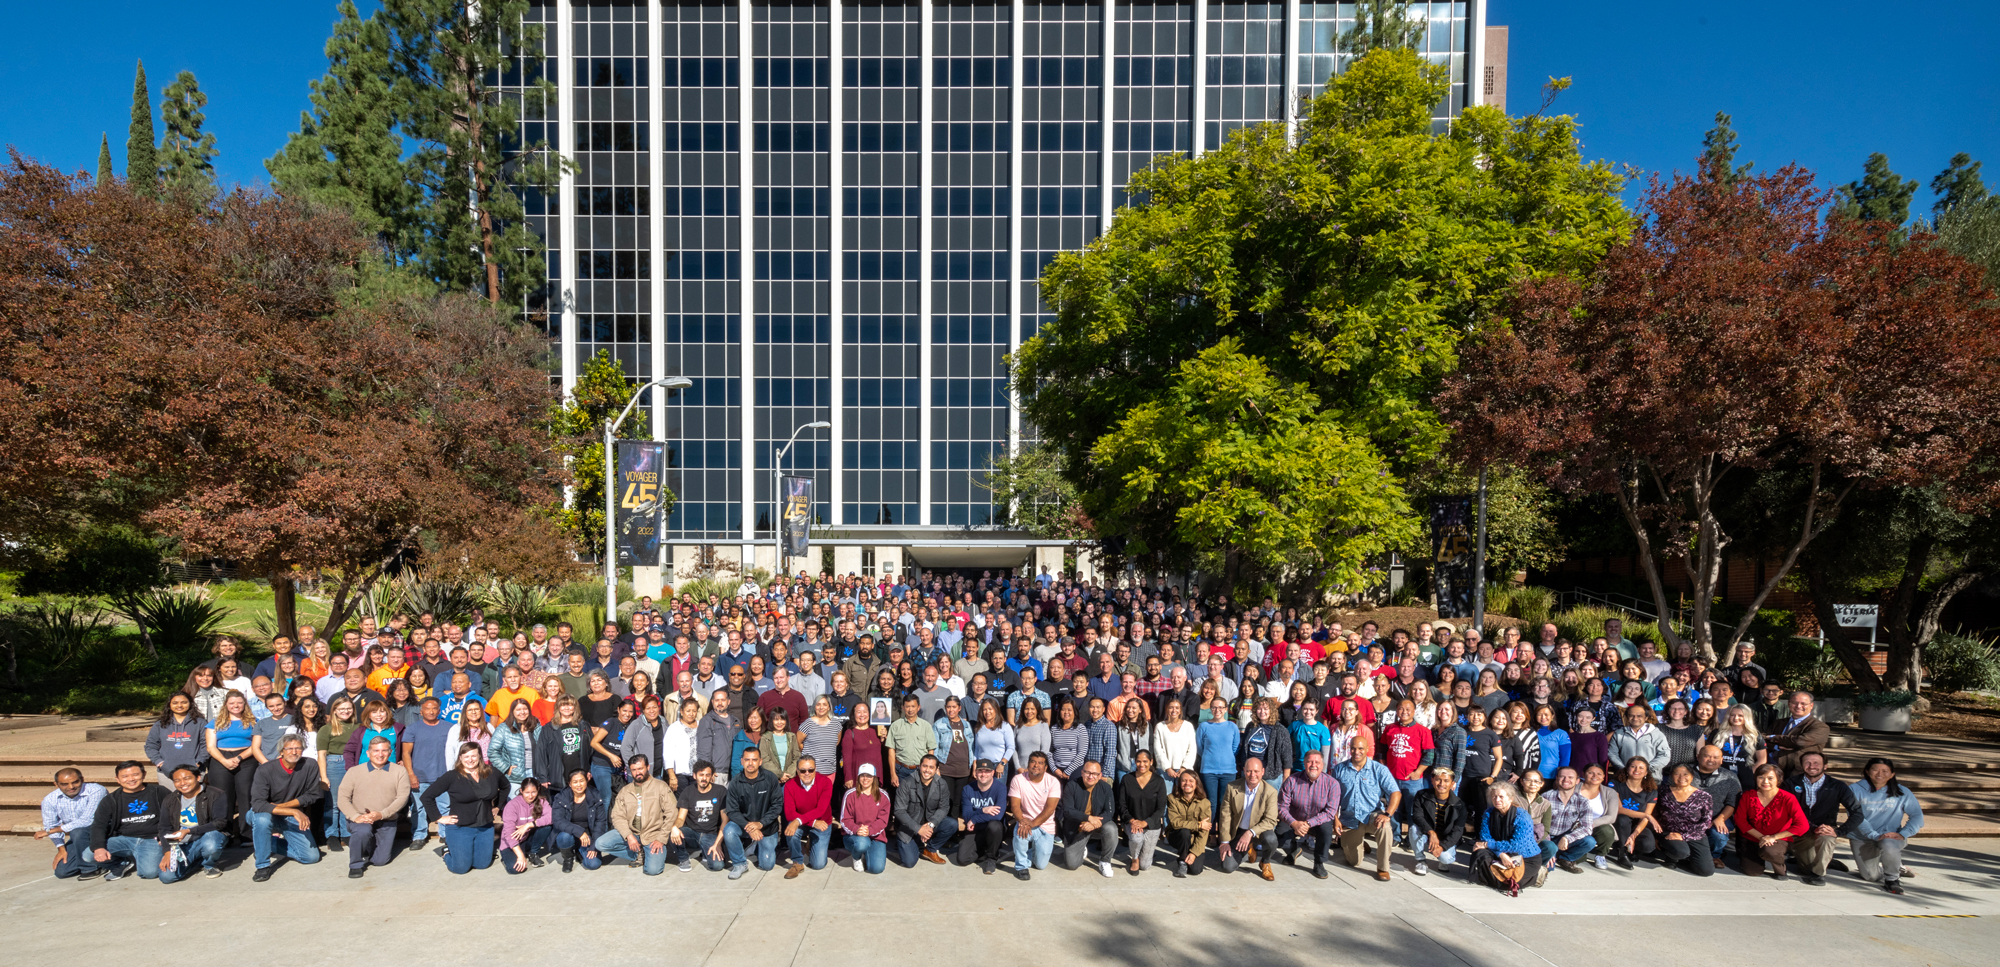 Dozens of people stand on a stair case in front of a glass building, looking towards the camera. They are posing for a team image, with some kneeling in front. They are framed on the top left and right be trees, with a blue sky in the distance. The image was taken at JPL in Pasadena, California. 